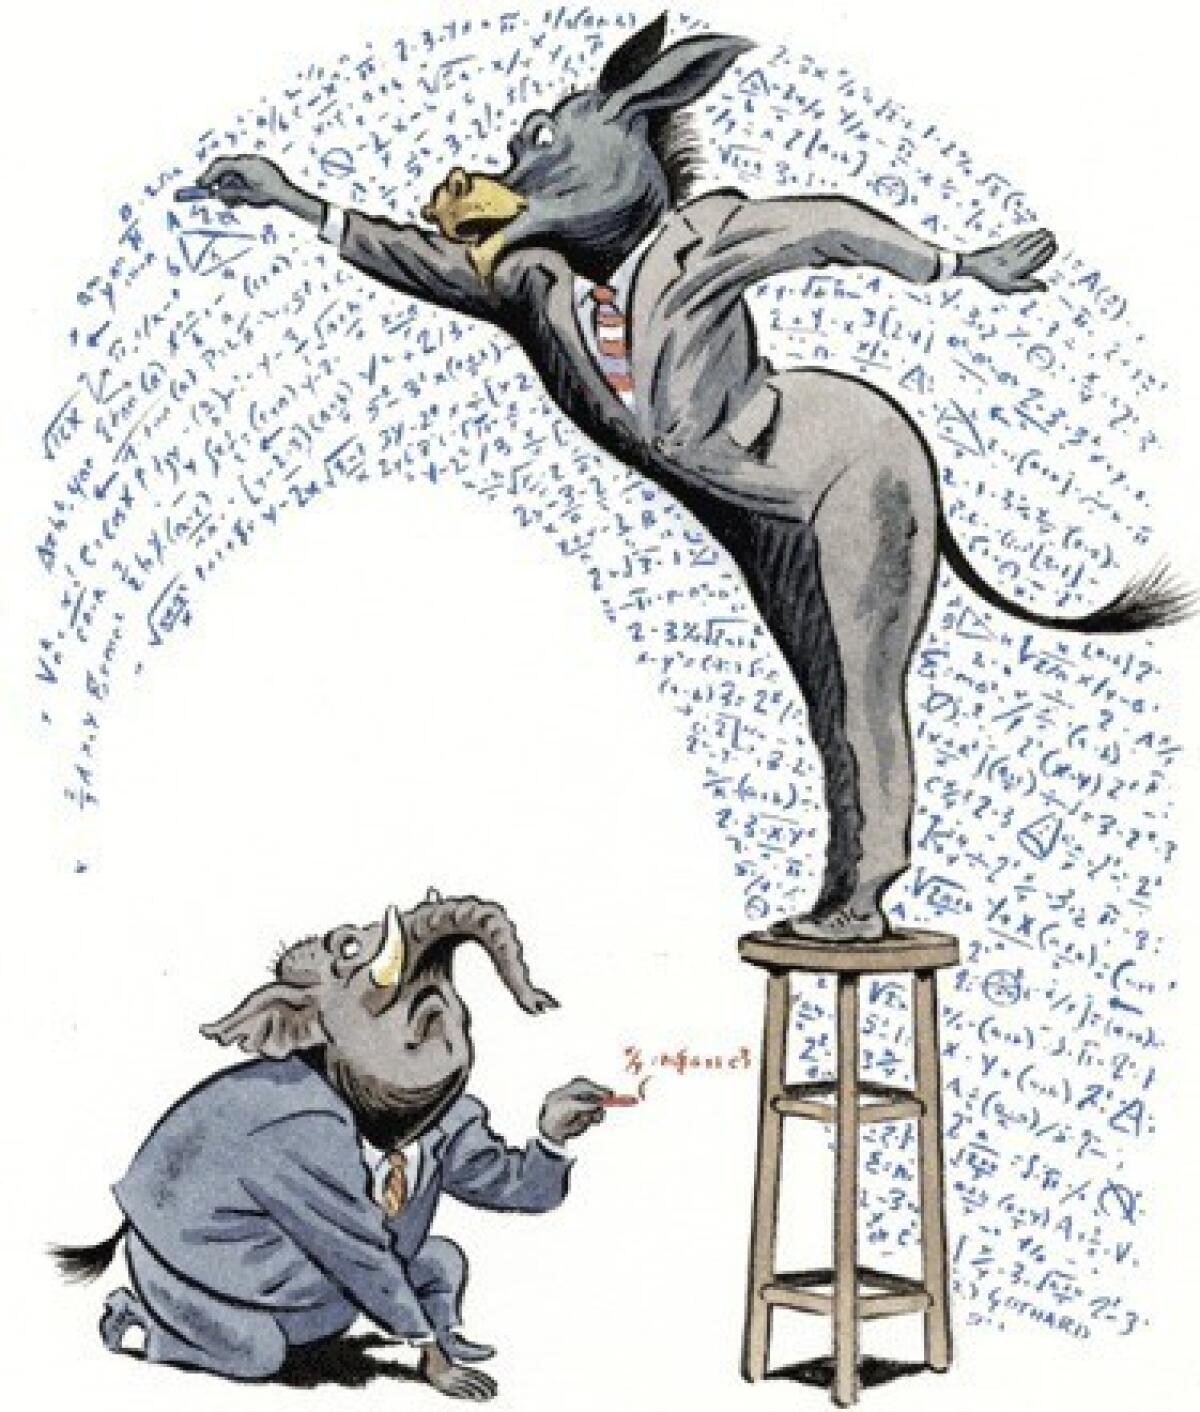 Pundits and prognosticators spent the presidential campaign season doing their best to predict the outcome of the race.